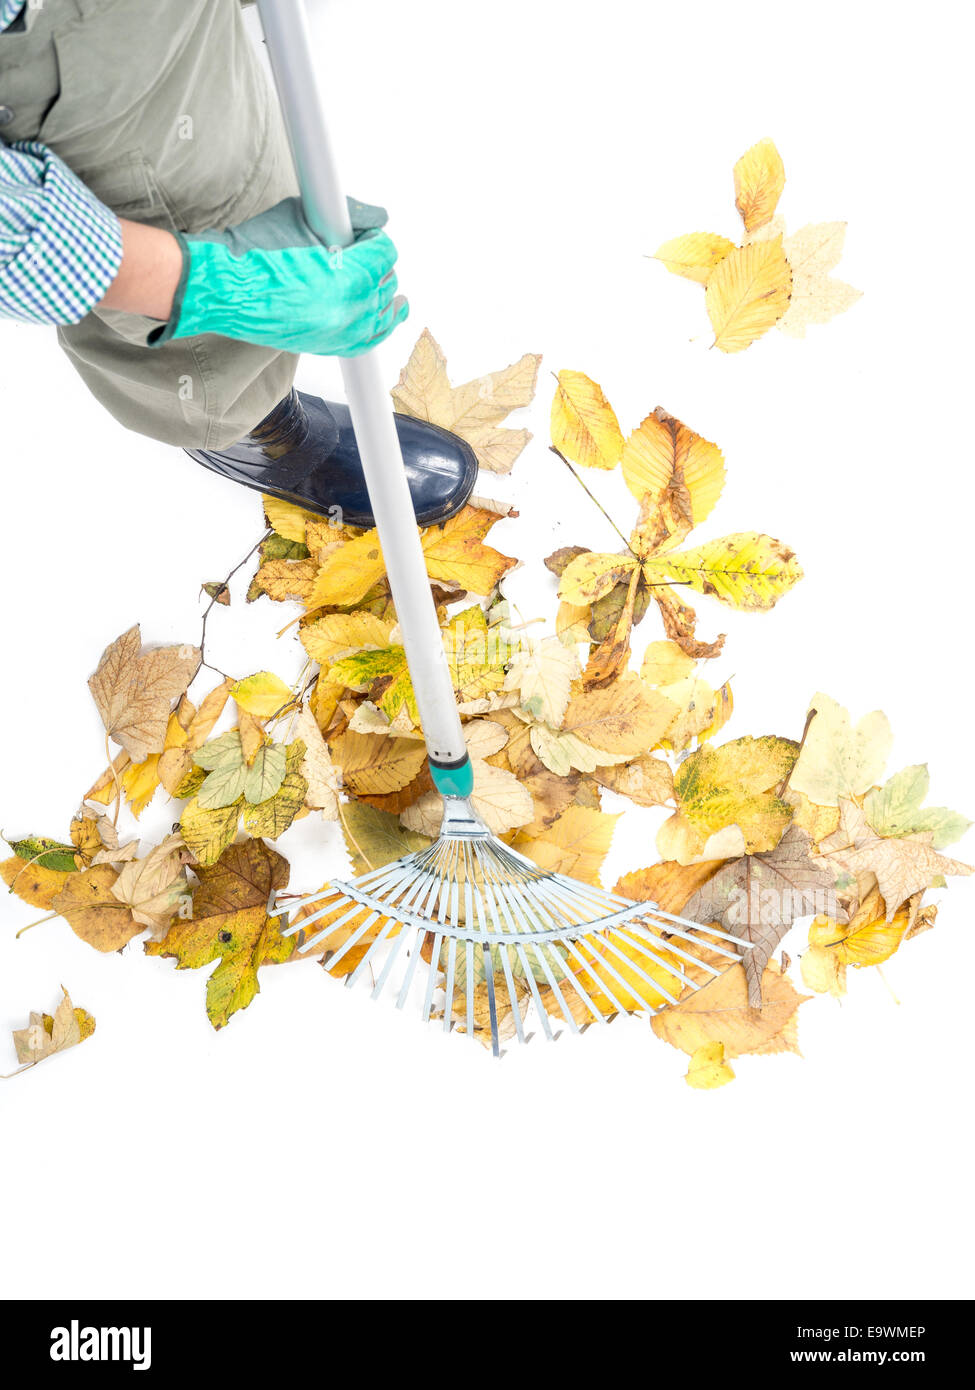 Closeup of gardener sweeping pile of dead fall leaves with fan rake, shot from above on white background Stock Photo